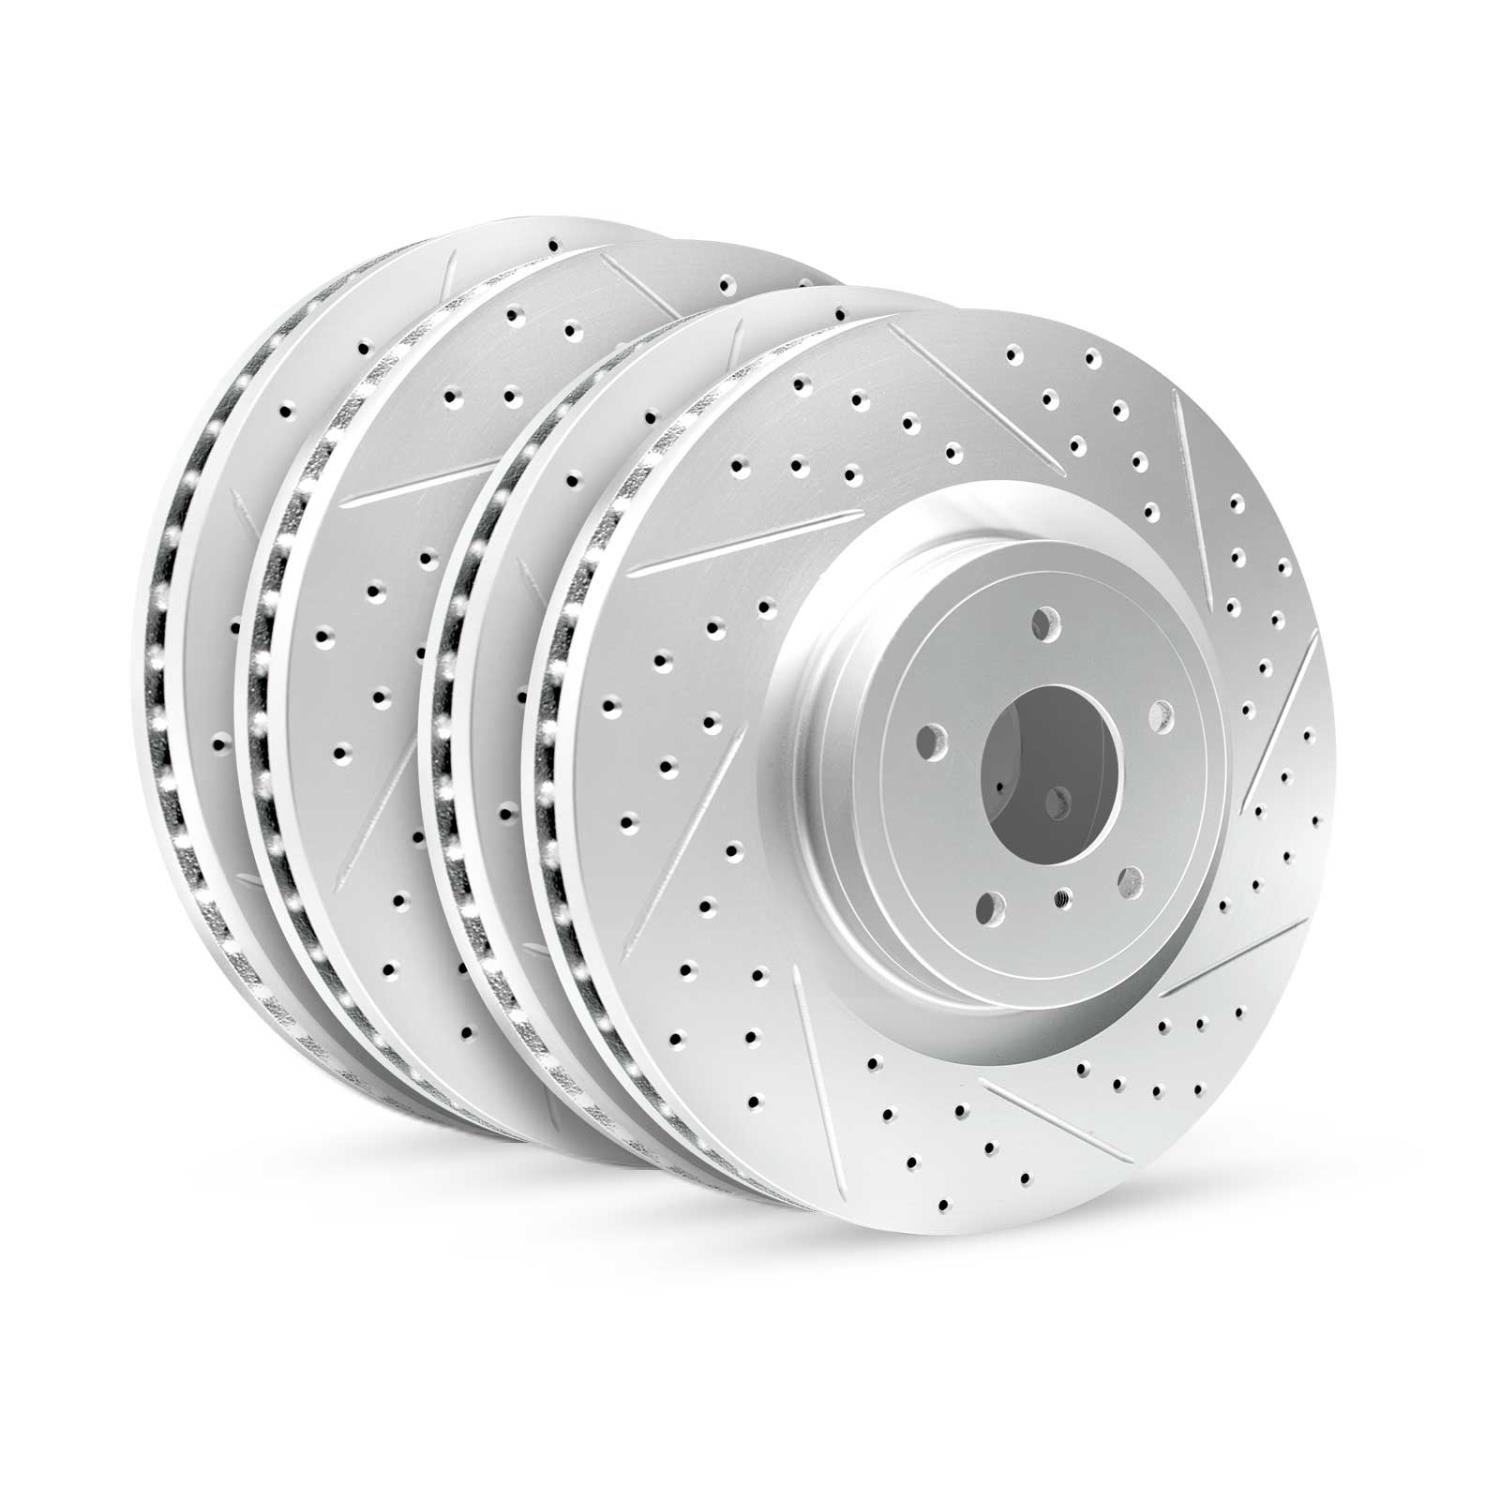 GEO-Carbon Drilled/Slotted Rotors, 1998-2010 Lexus/Toyota/Scion, Position: Front/Rear